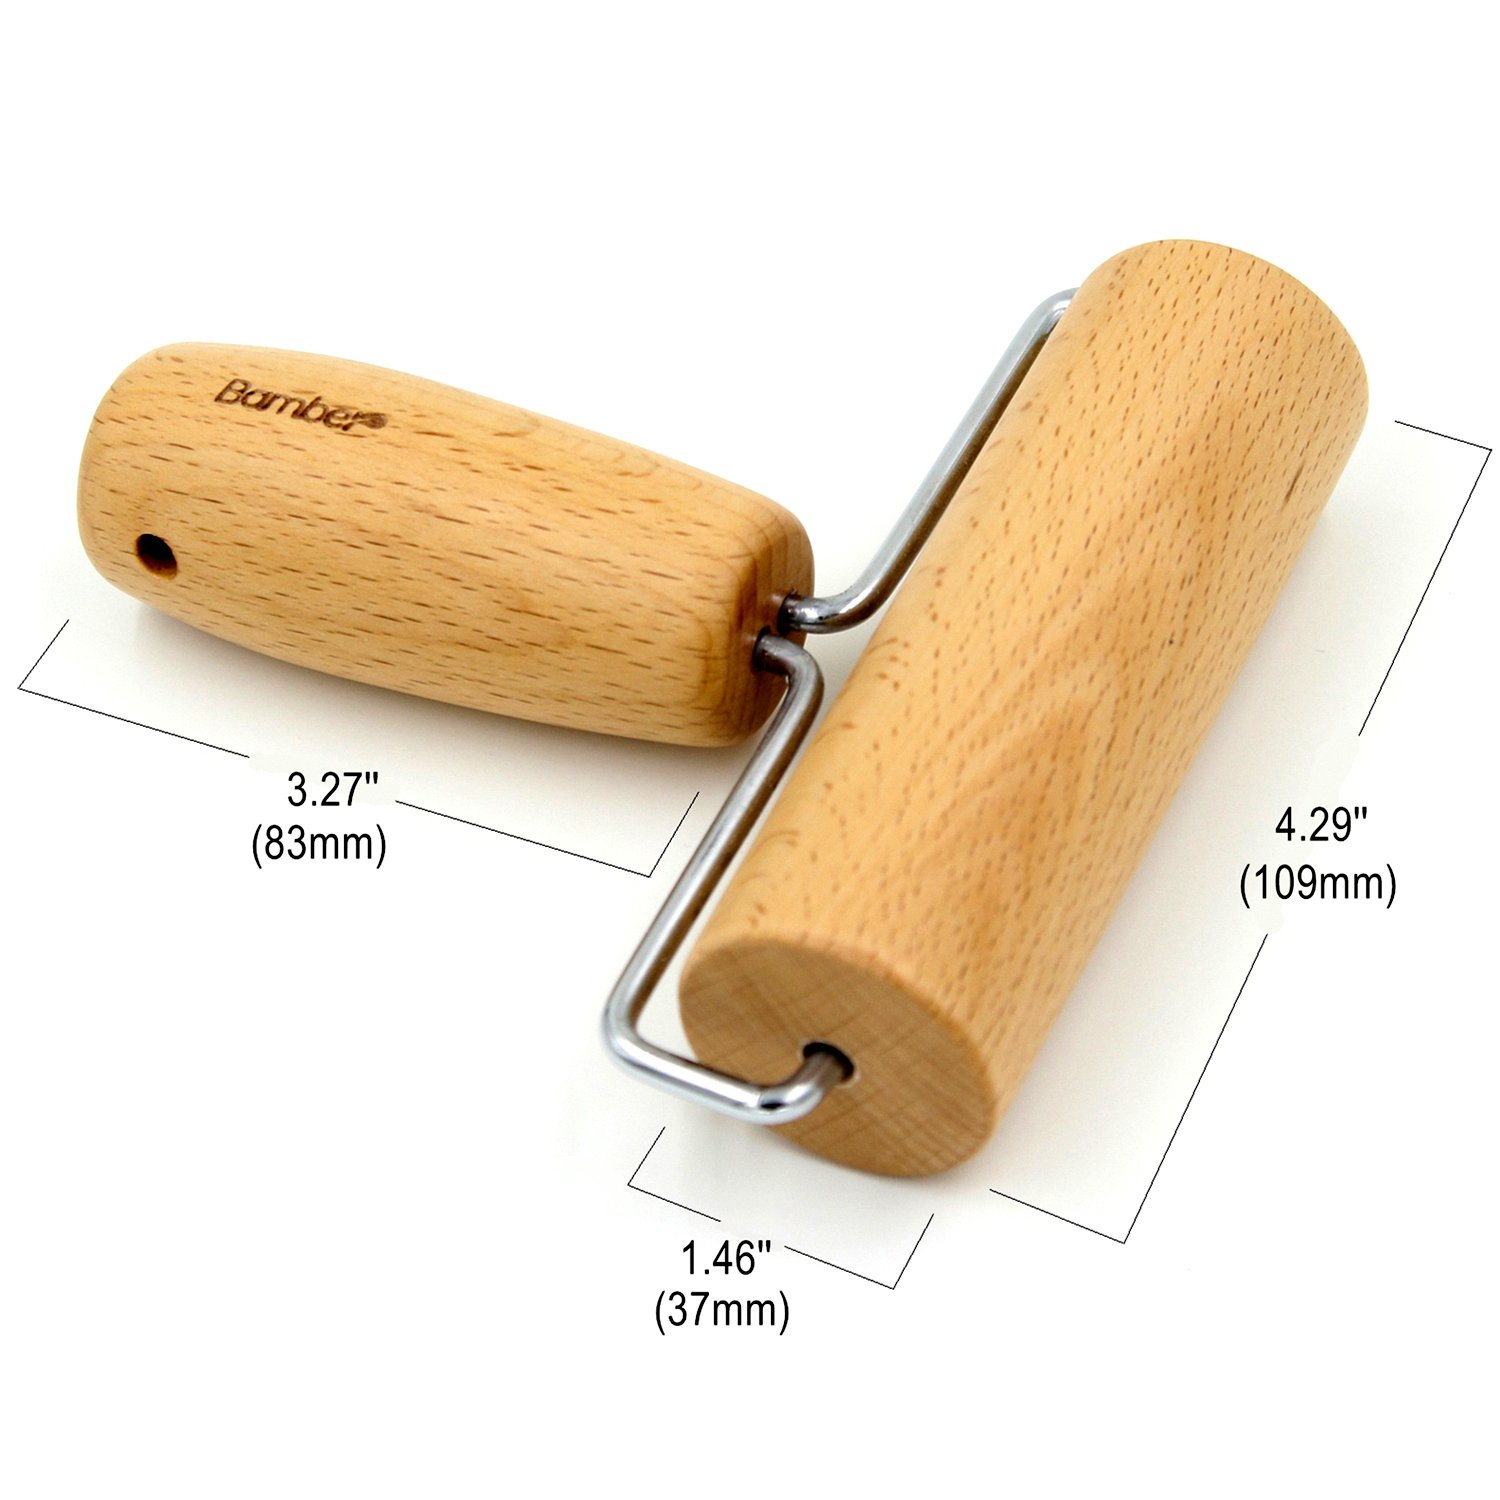 Bamber Dough Roller Beech Wood Rolling Pin for Baking Pastry Pizza, 4.3-Inch Smooth Construction & Easy to Roll - Essential Kitchen Utensil